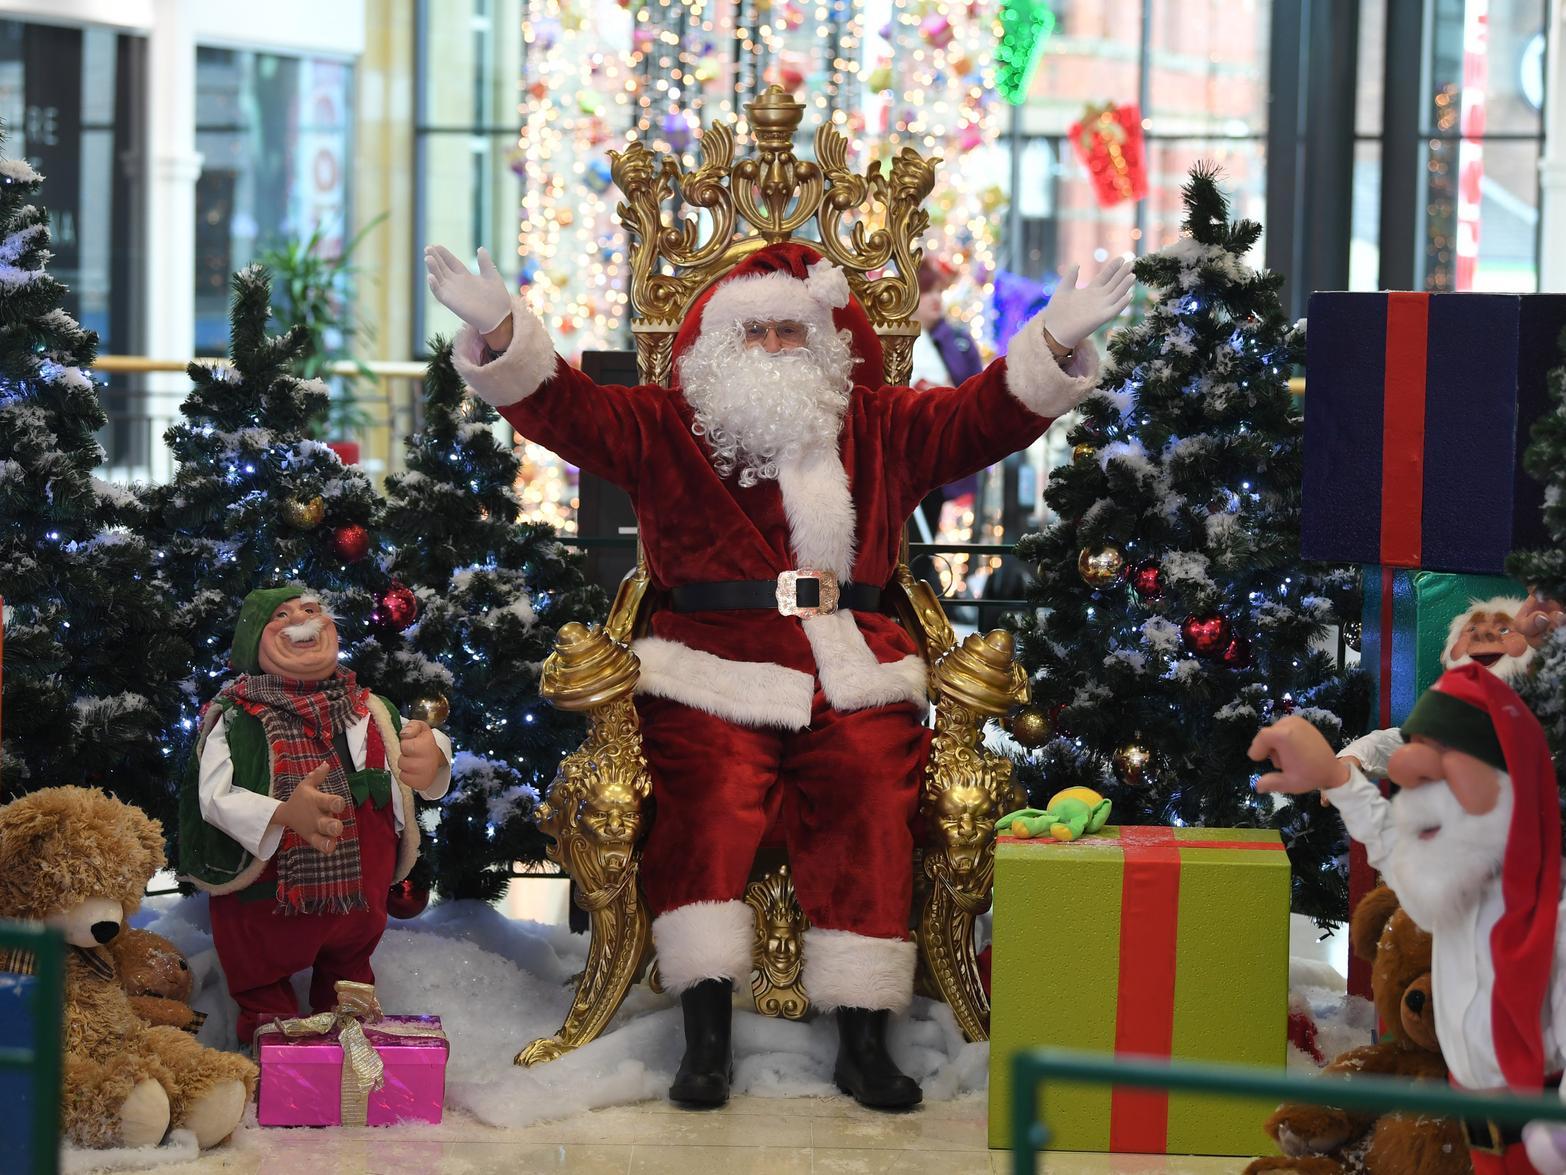 Santa's grotto, at St Georges Shopping Centre, in Preston, is open every weekend until Christmas Eve and Wednesdays and Thursdays in December. Free, with a small donation to support Galloways Society for the Blind.